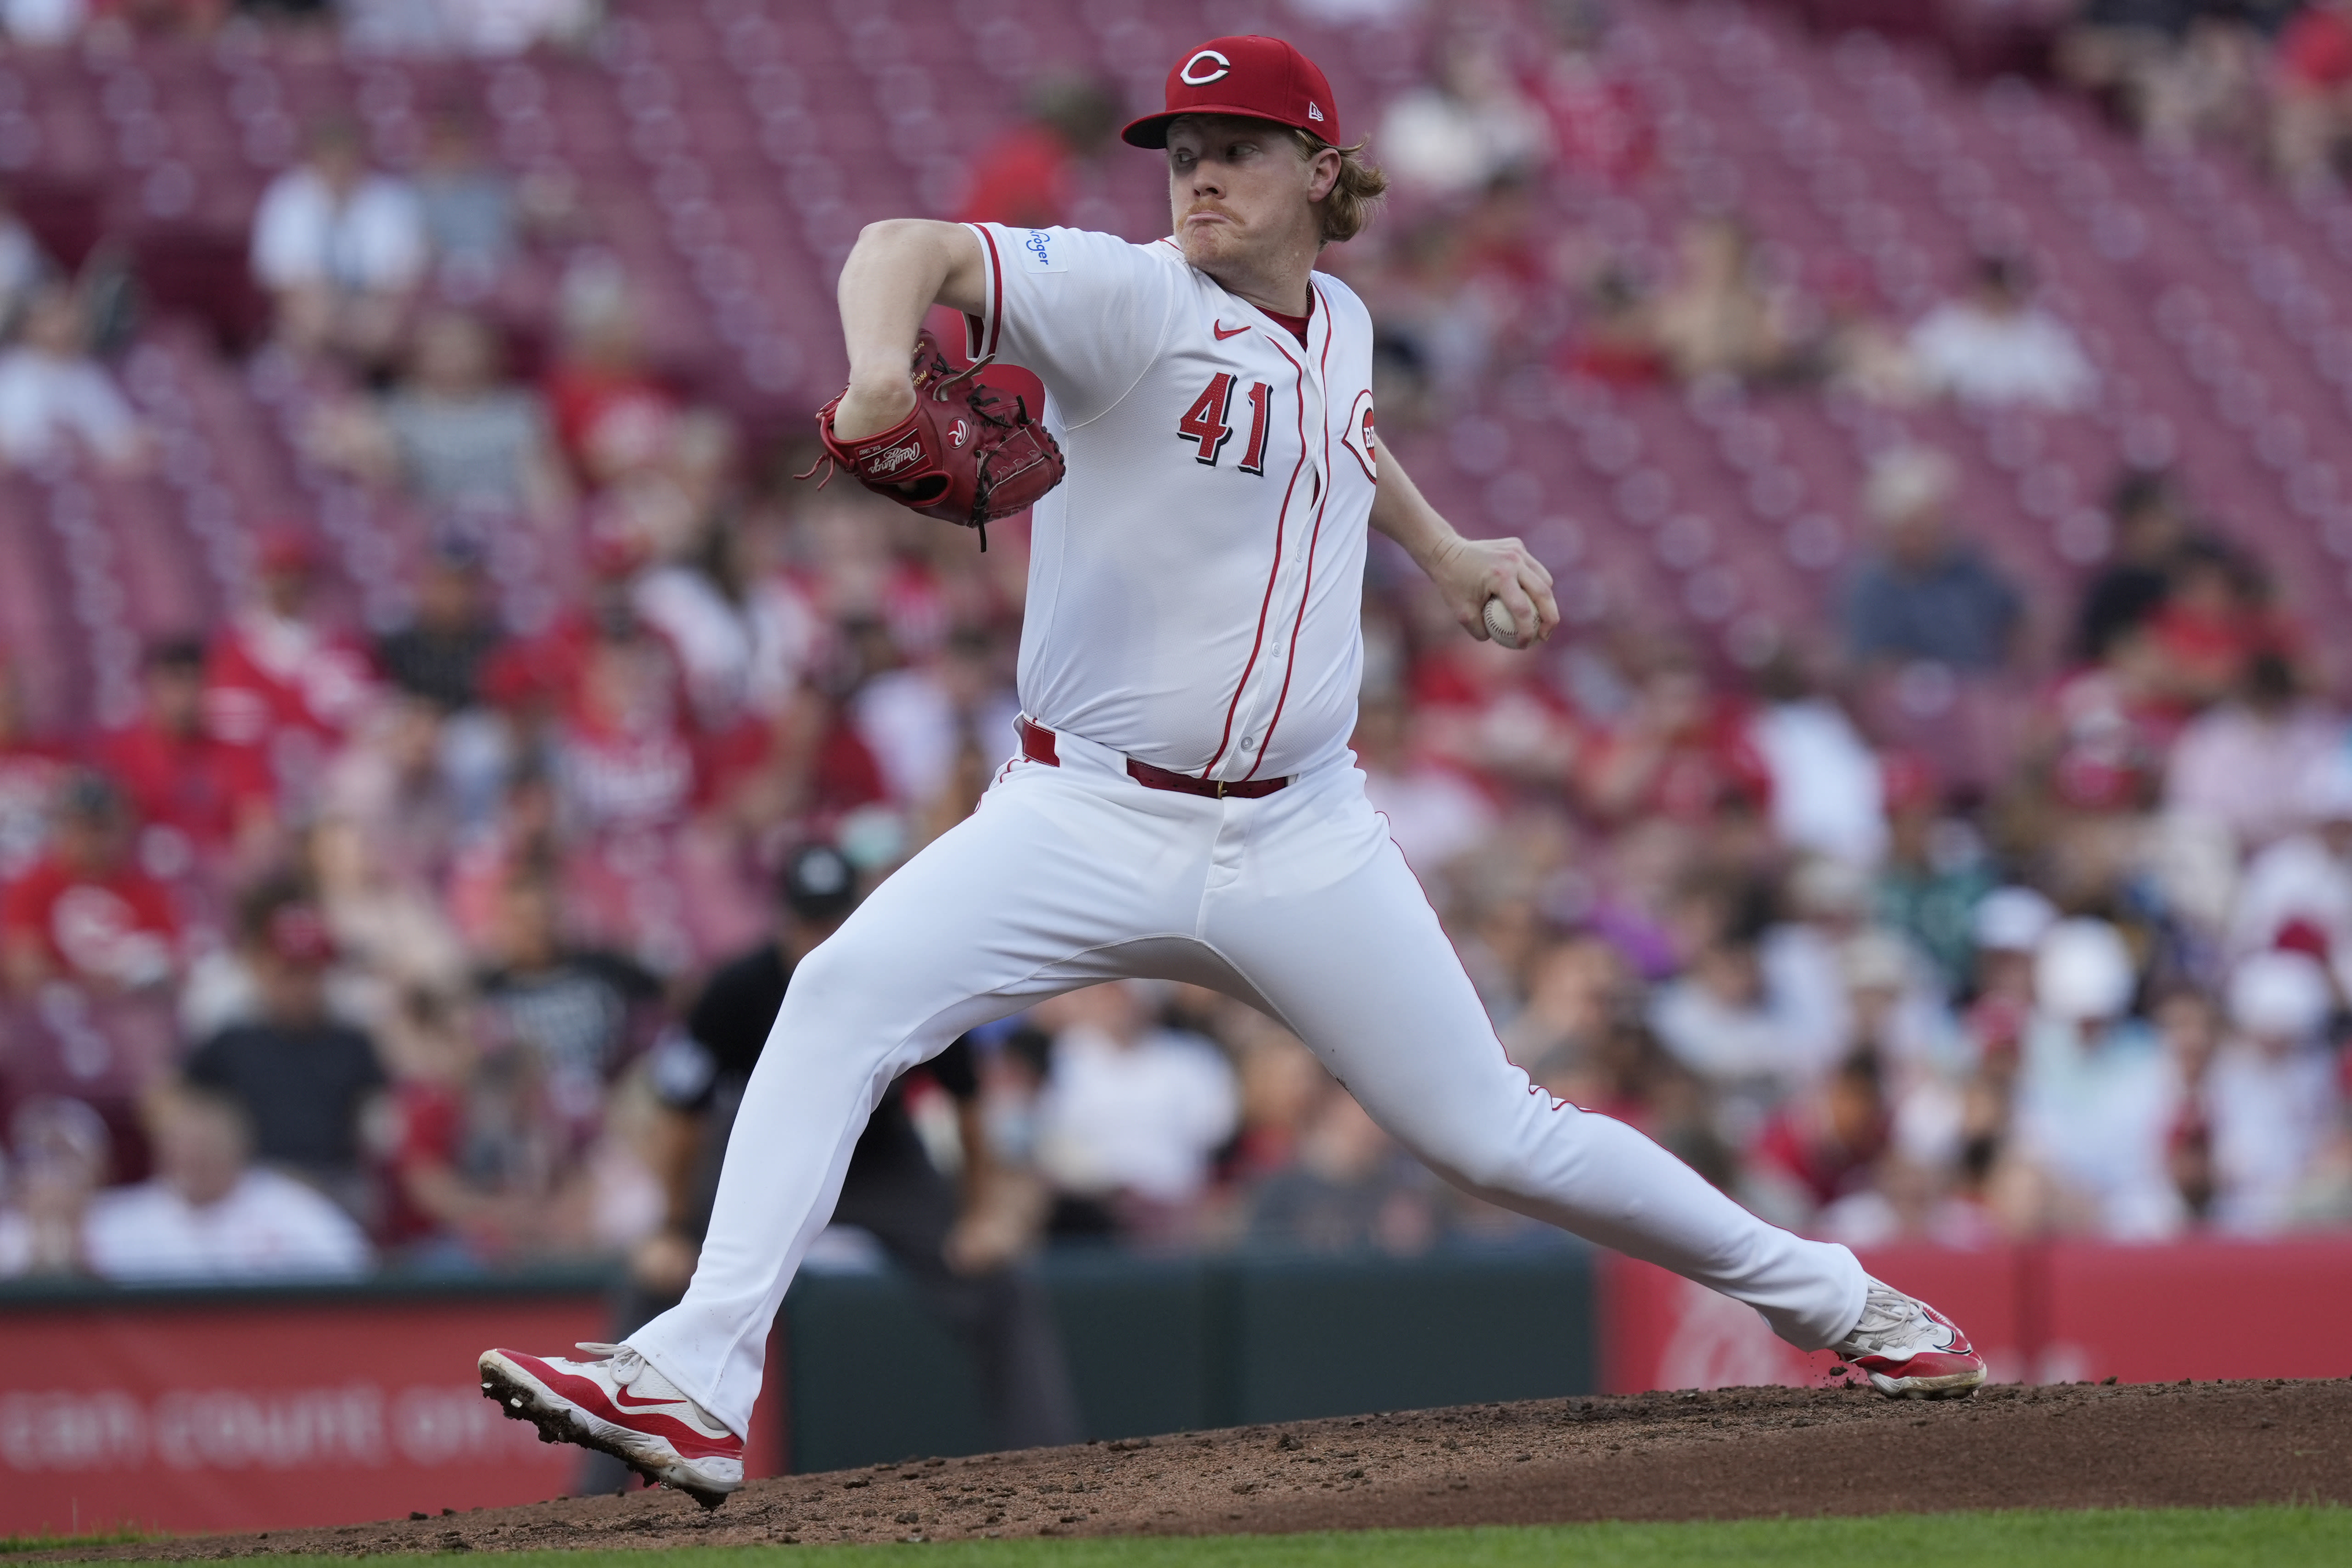 Andrew Abbott handcuffs Padres as Reds rebound from disastrous road trip to win 2-0